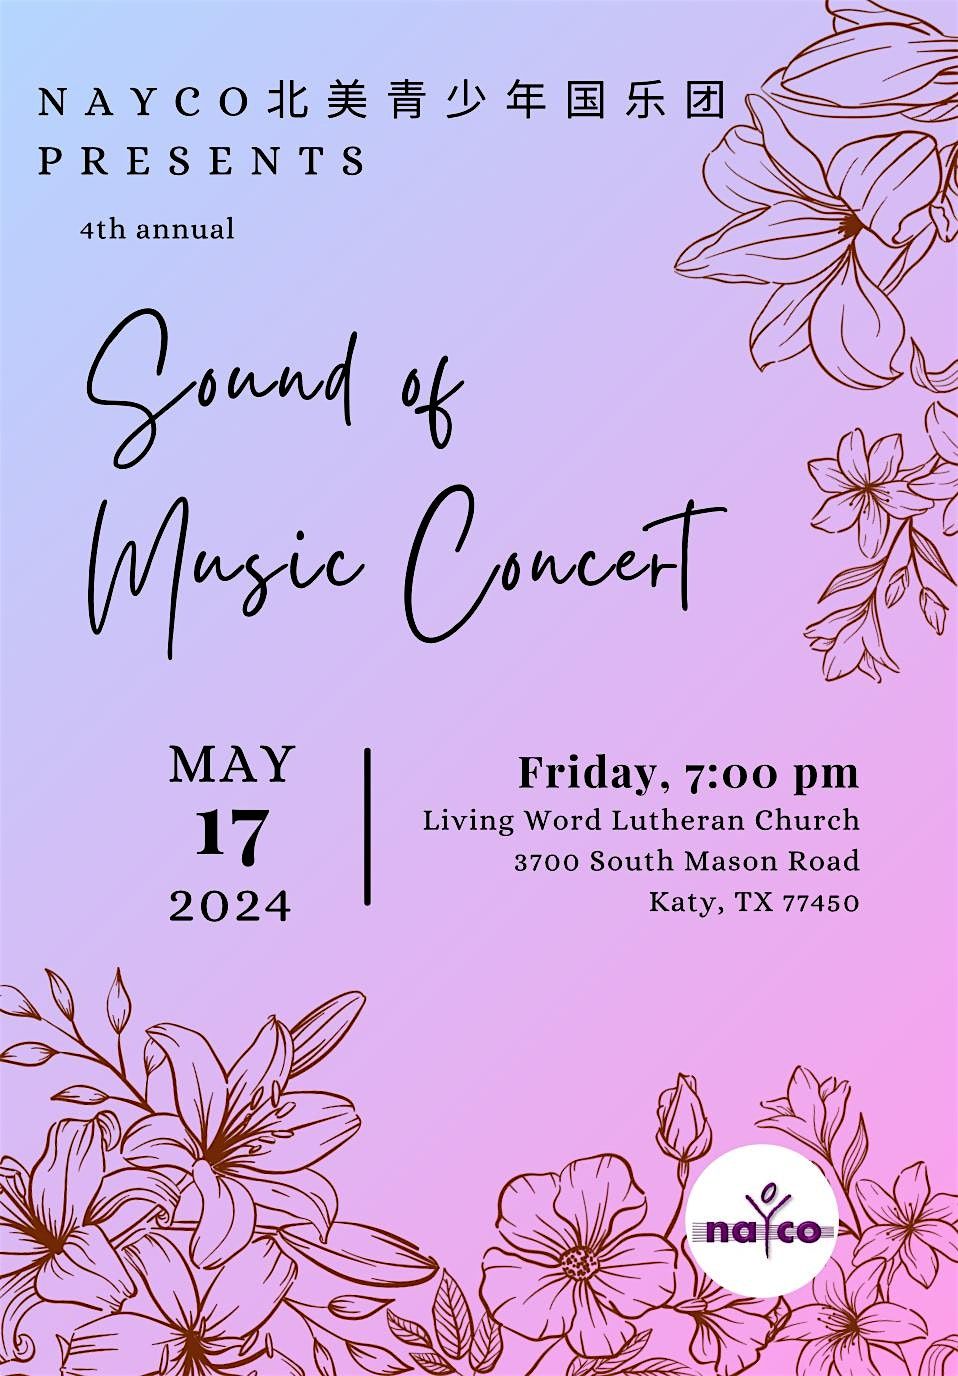 2024 NAYCO Sound of Music Concert